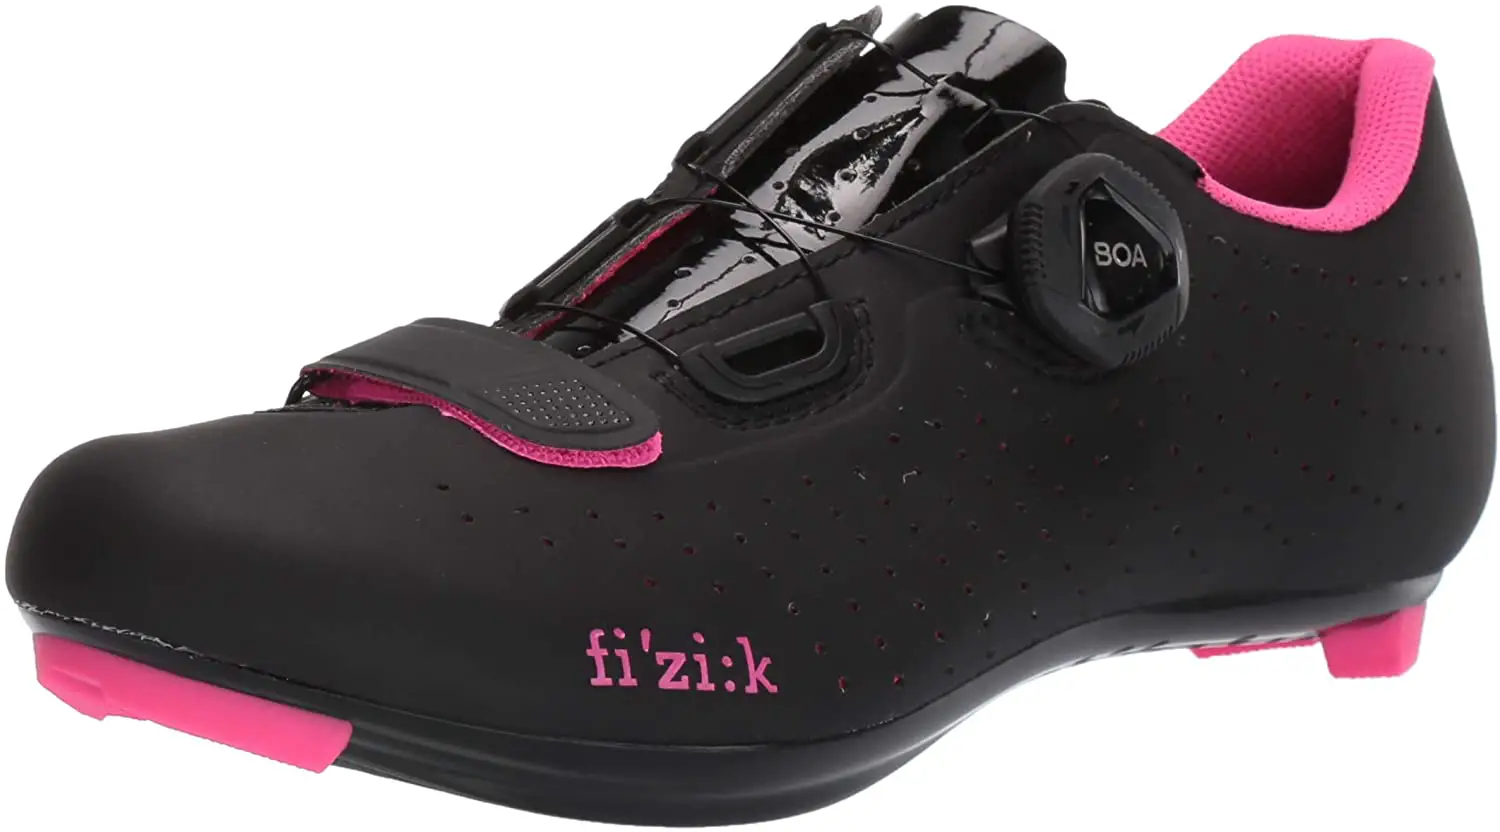 Best Cycling Shoes Under 200